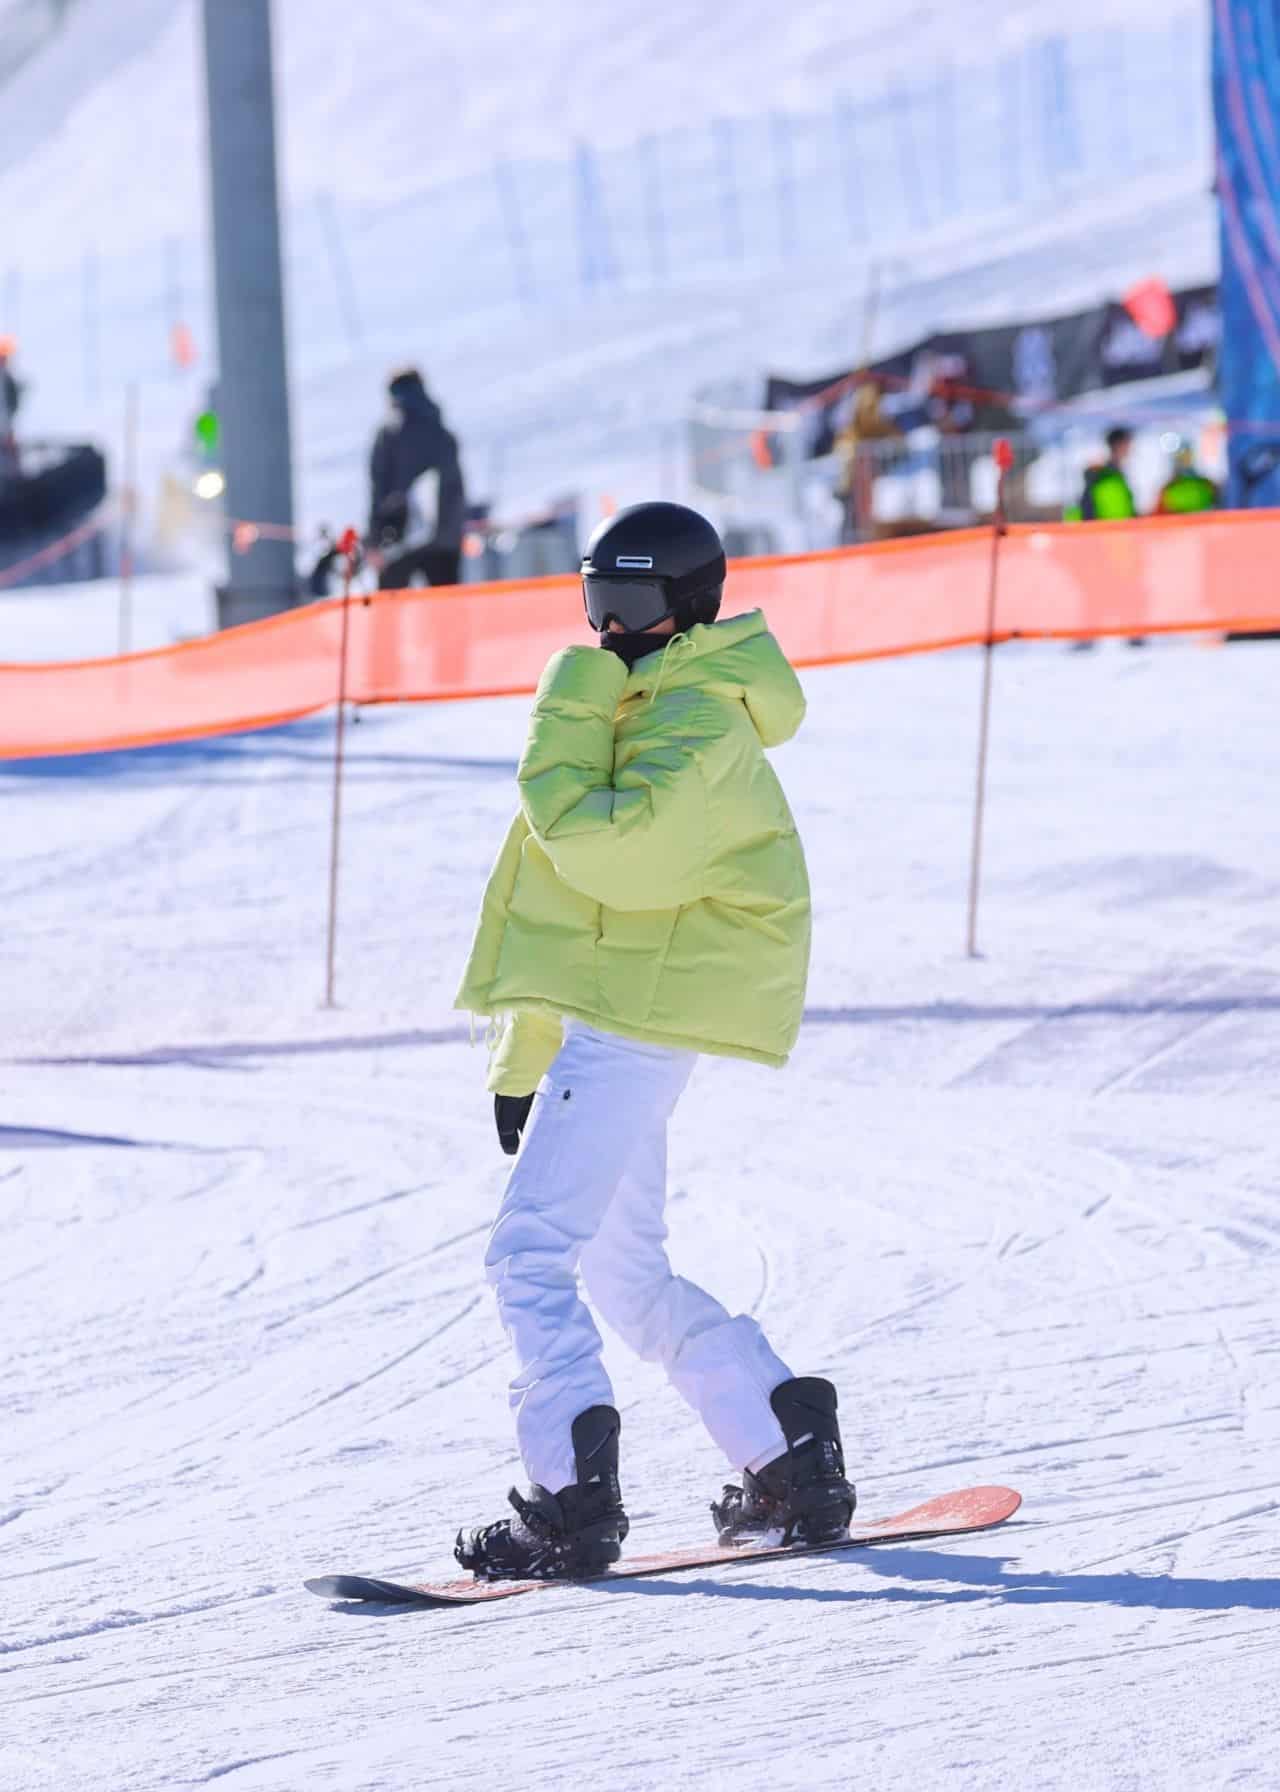 Kendall Jenner Looked Chic as She was Snowboarding Like a Pro in Aspen